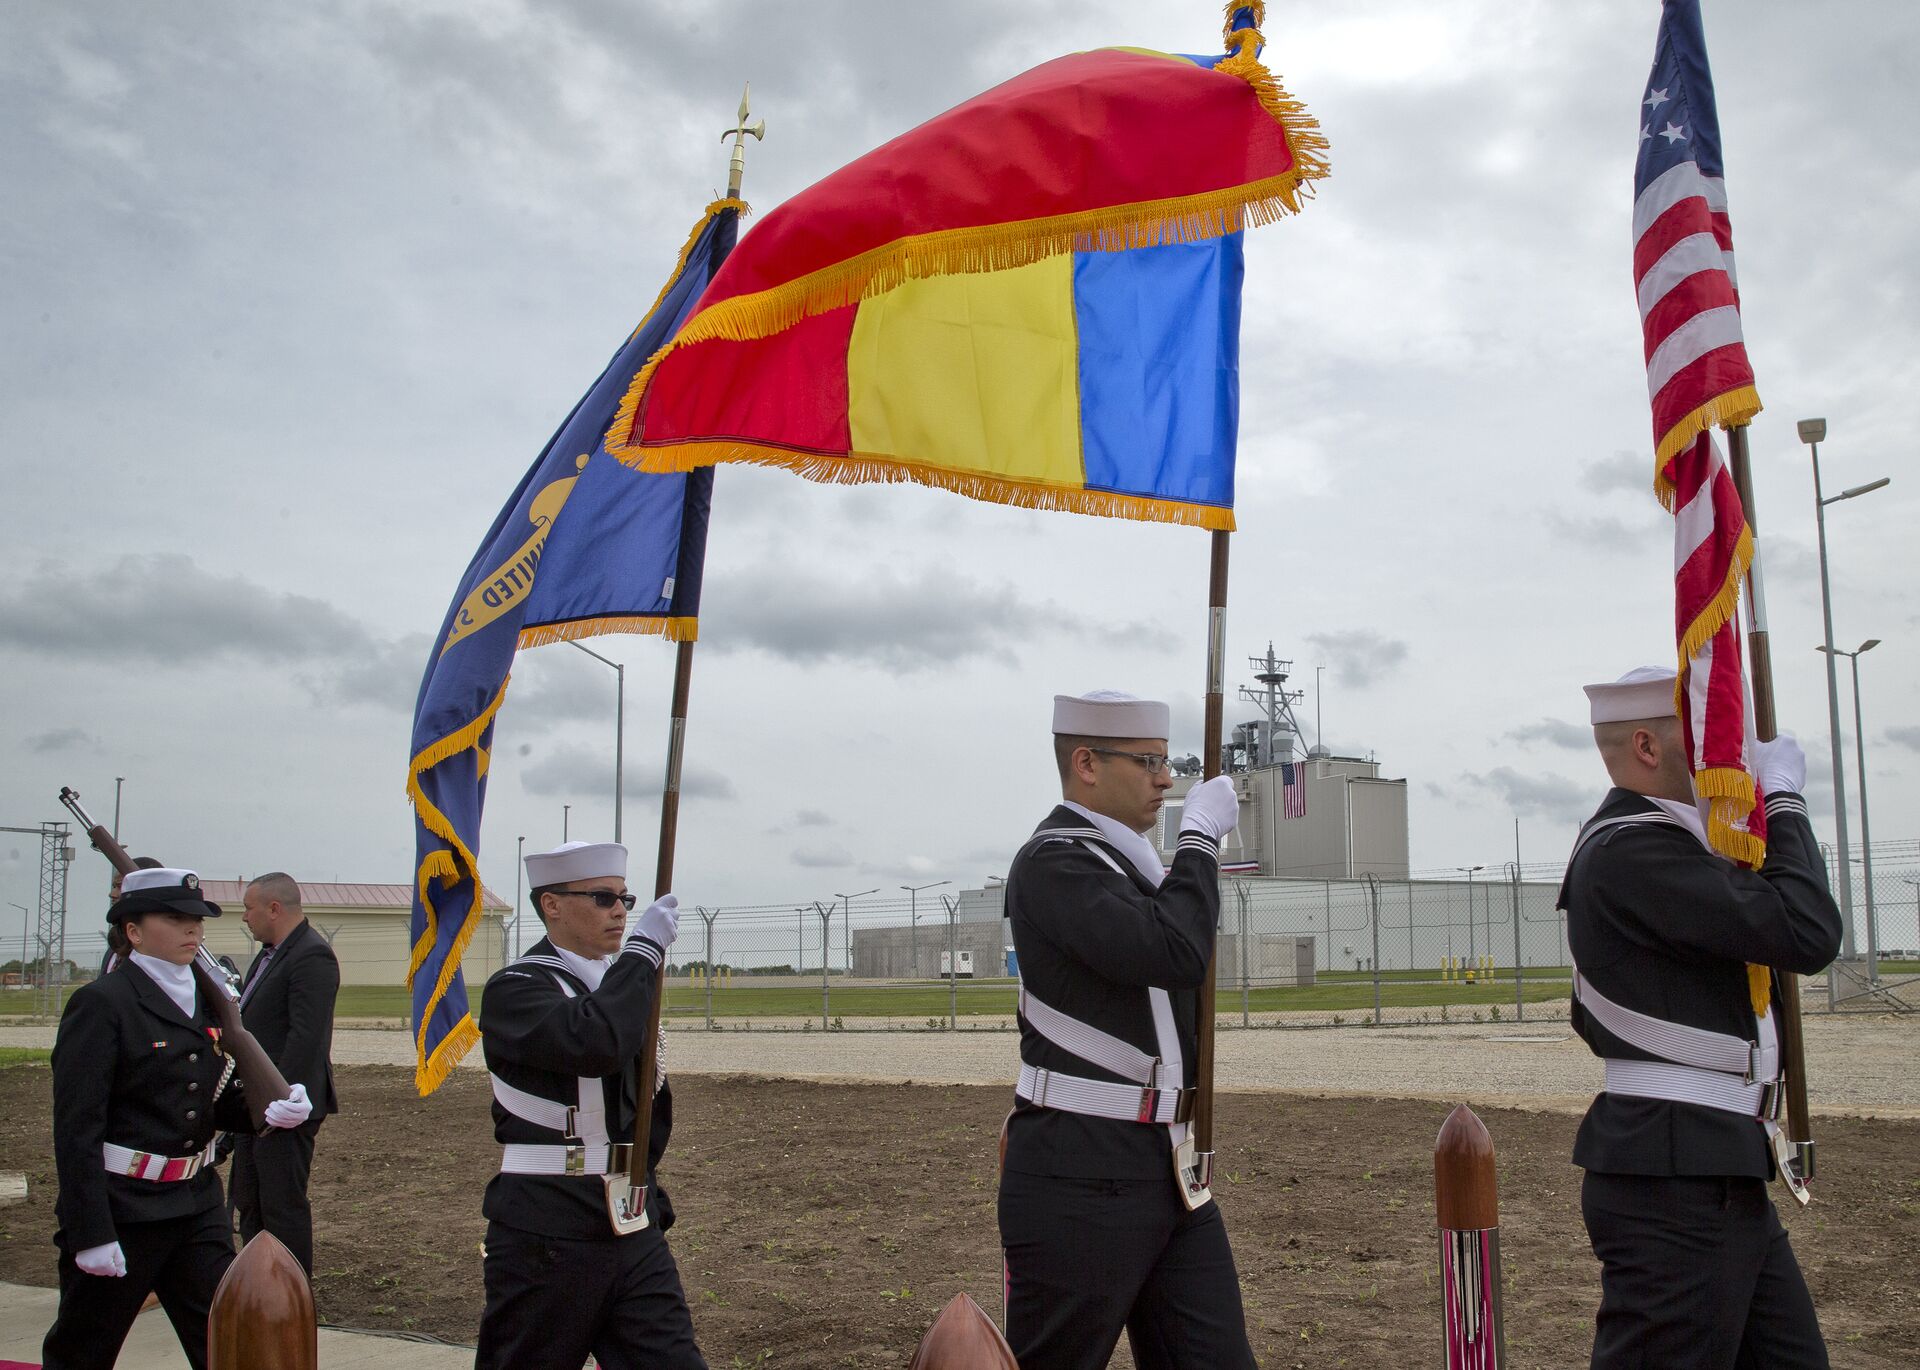  US Navy flag bearers, backdropped by the radar building of a missile defense base, during an opening ceremony attended by U.S., NATO and Romanian officials at a base in Deveselu, Southern Romania, Thursday, May 12, 2016. Russia has expressed concerns that the Aegis Ashore anti-missile systems in Poland and Romania could be converted to station offensive Tomahawk cruise missiles. - Sputnik International, 1920, 07.10.2022